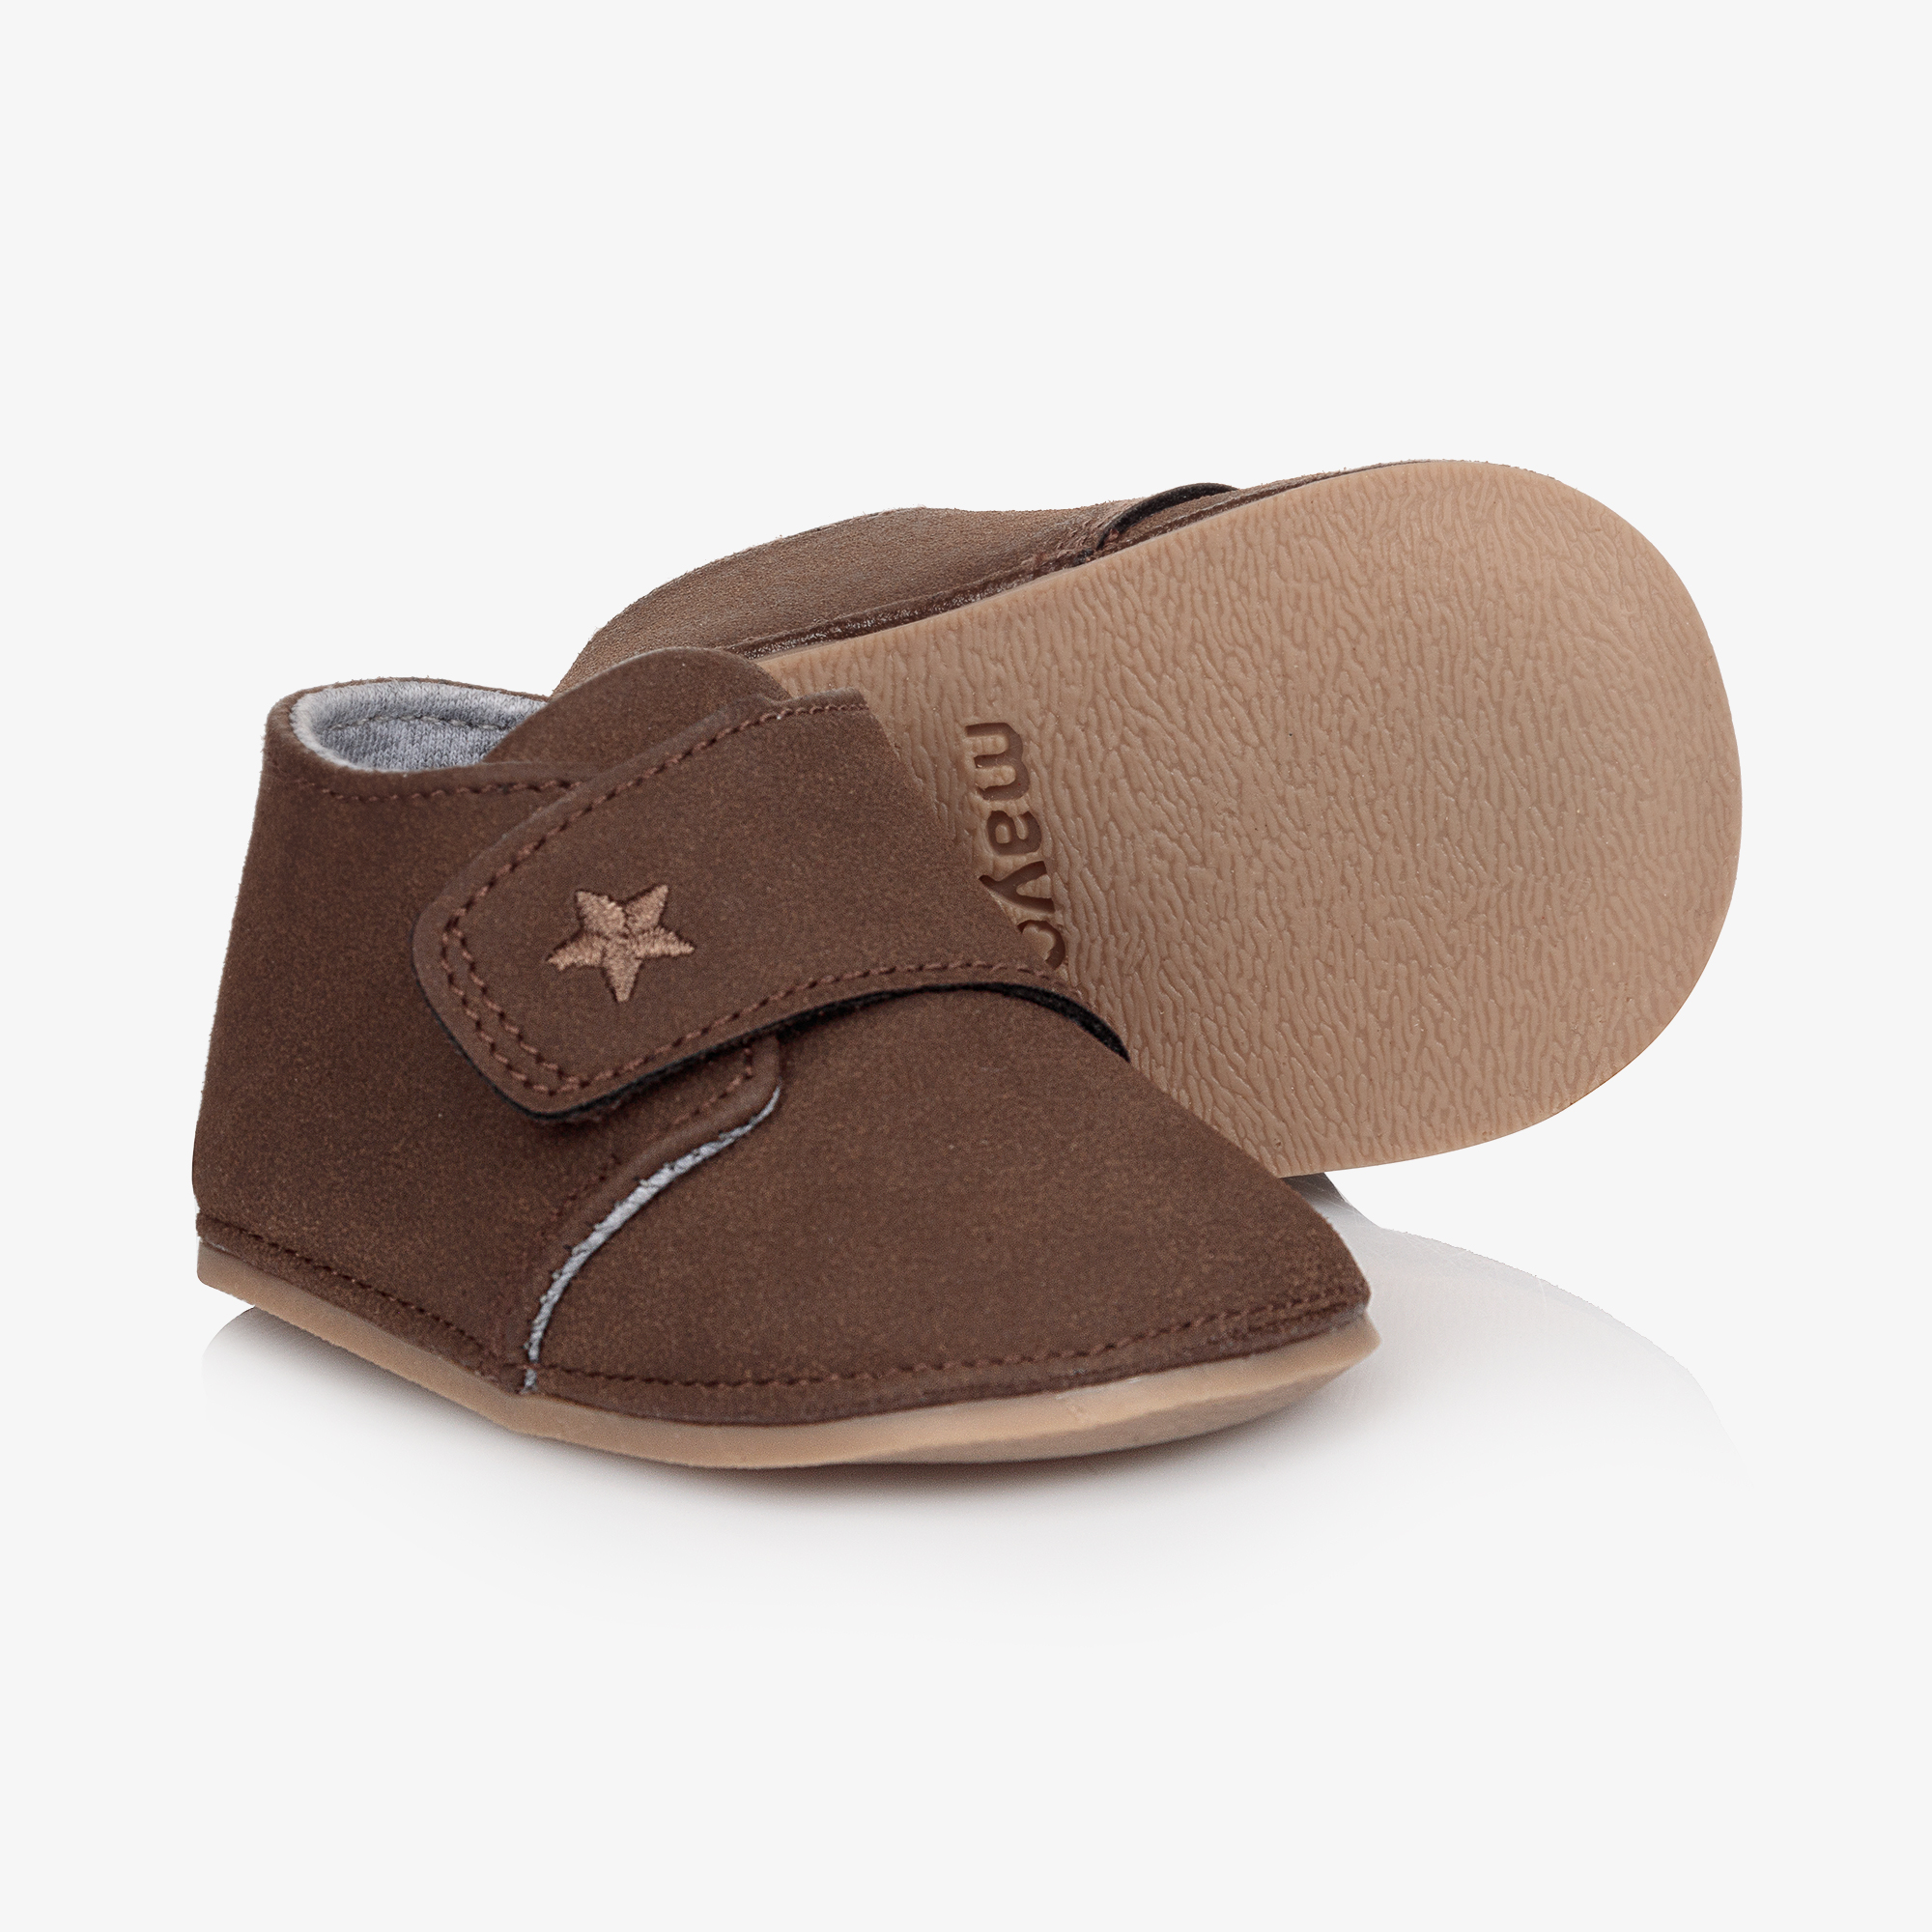 Designer MAYORAL Baby Boys Pre Walking Shoes Brown WAS £18.00 NOW £9.99 SALE 